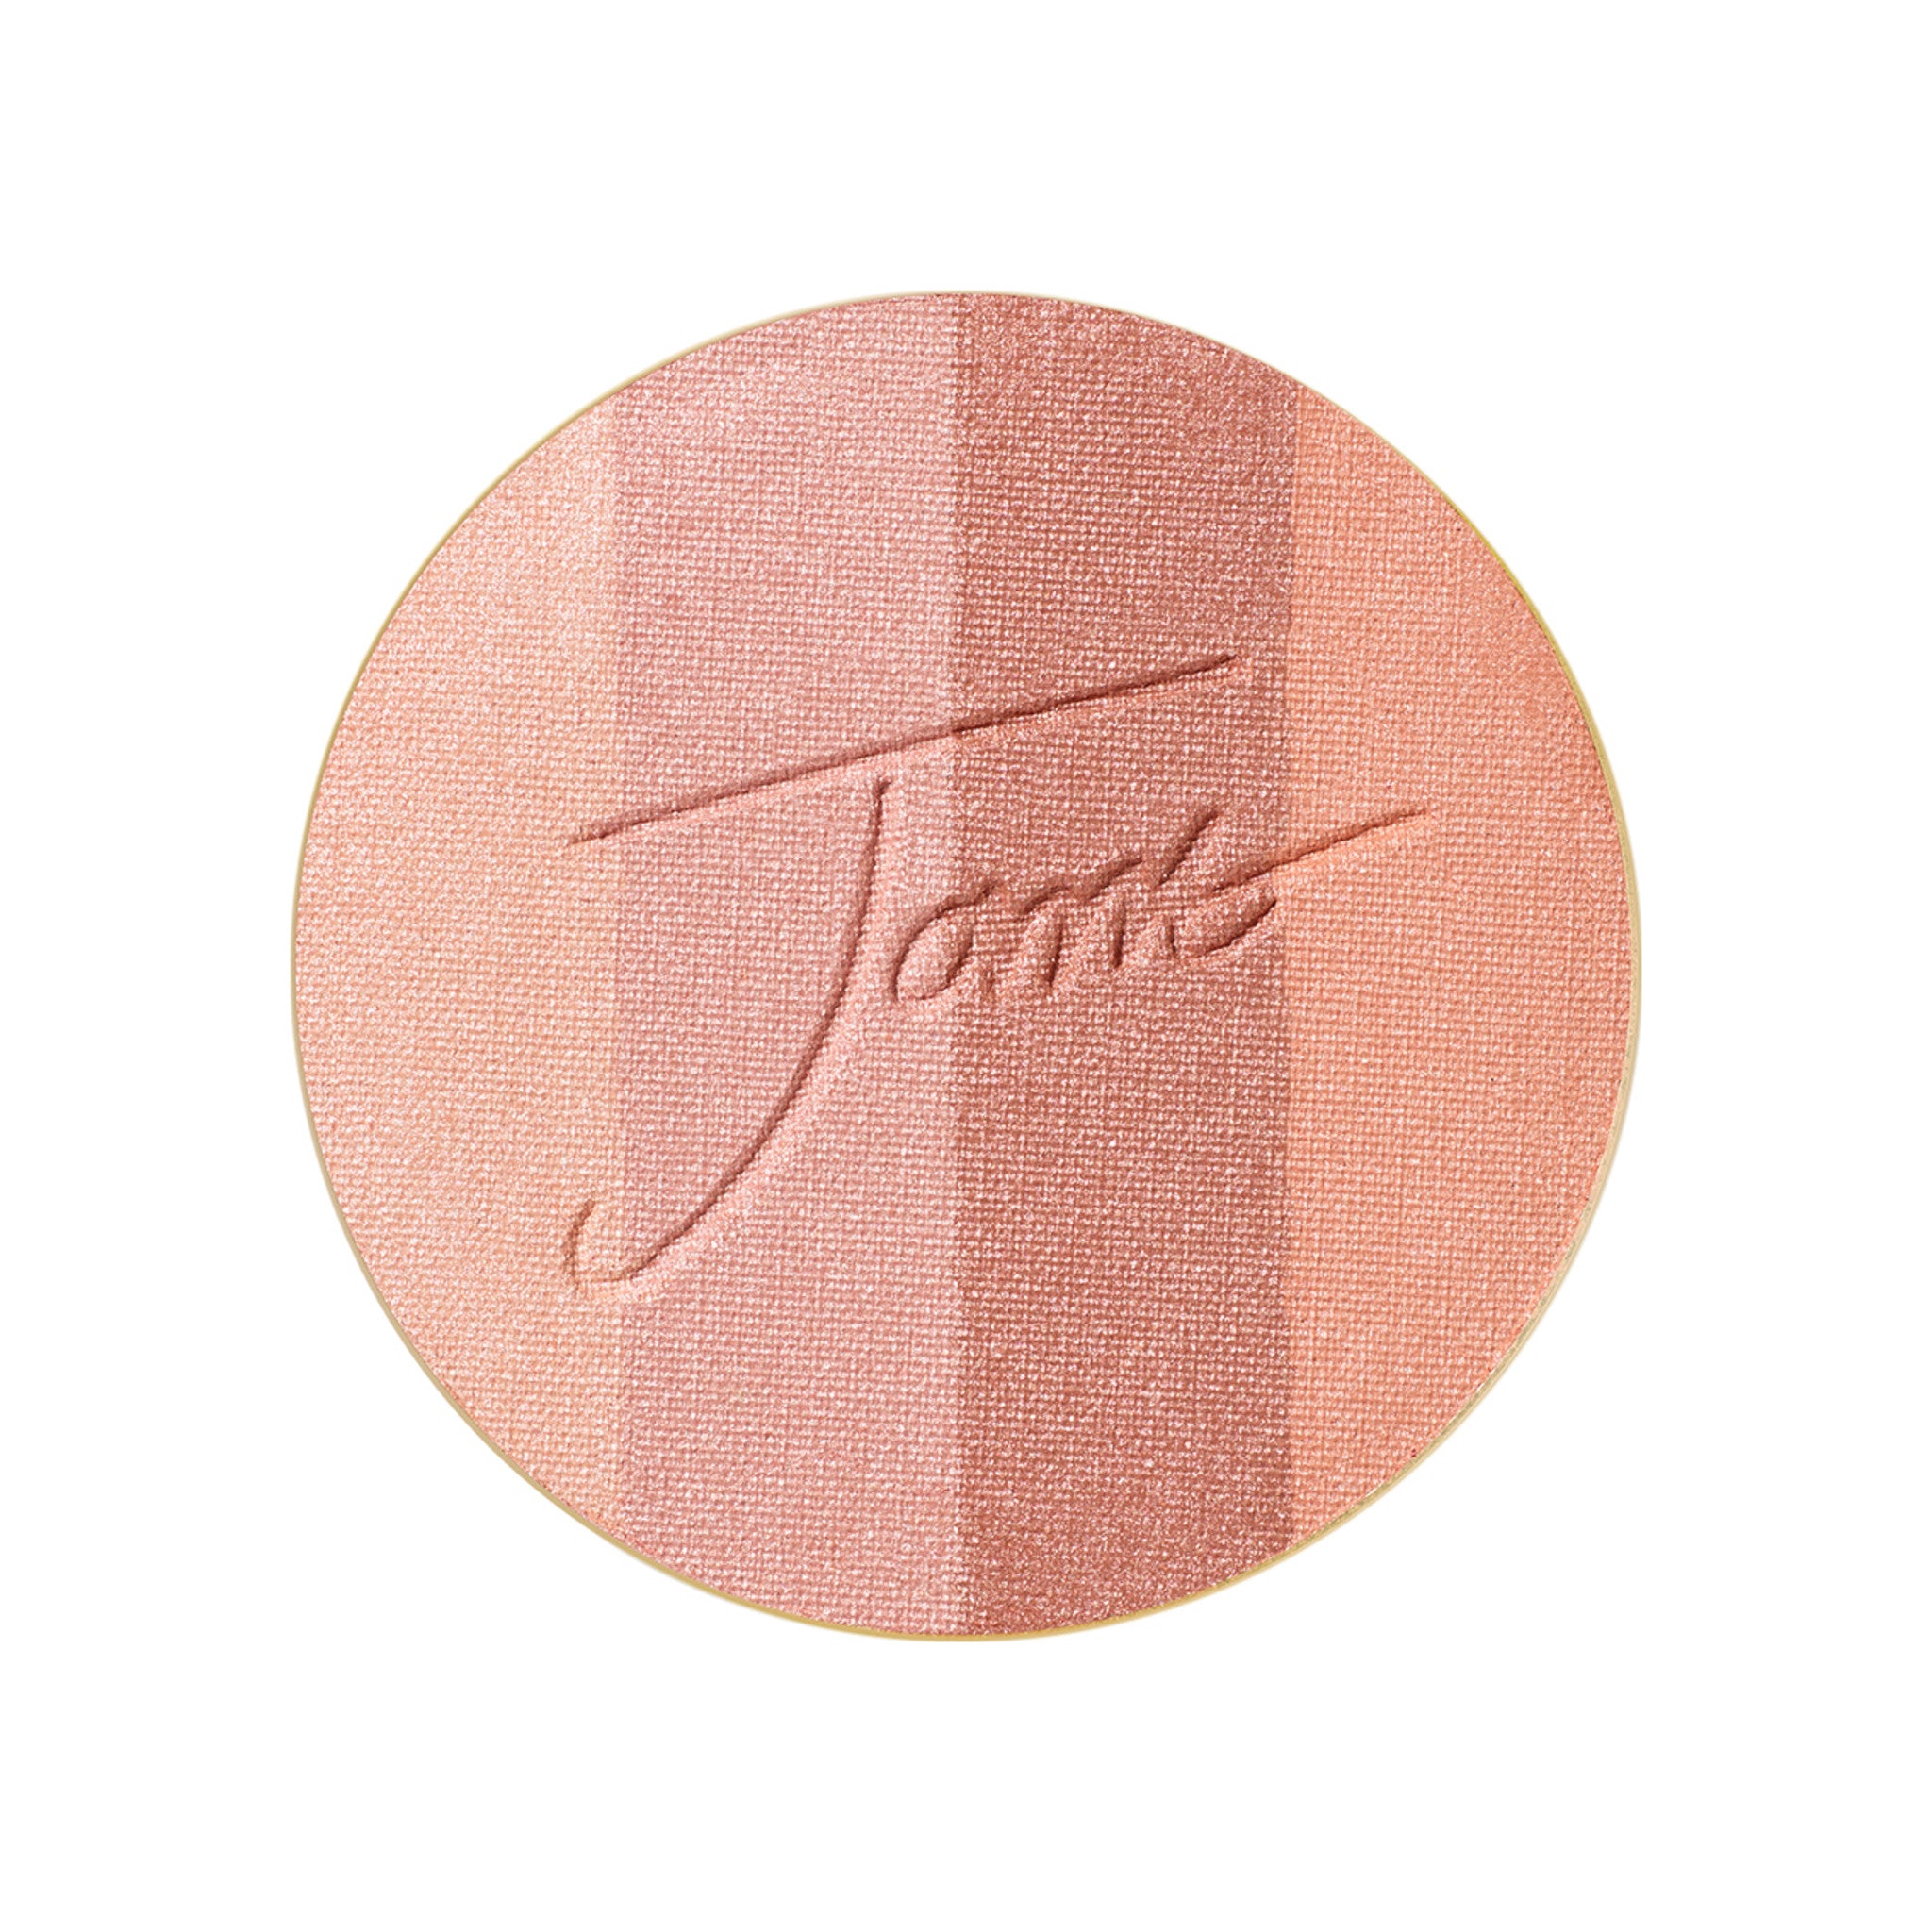 Jane Iredale PureBronze Shimmer Bronzer Refill Color/Shade variant: Peaches & Cream main image.